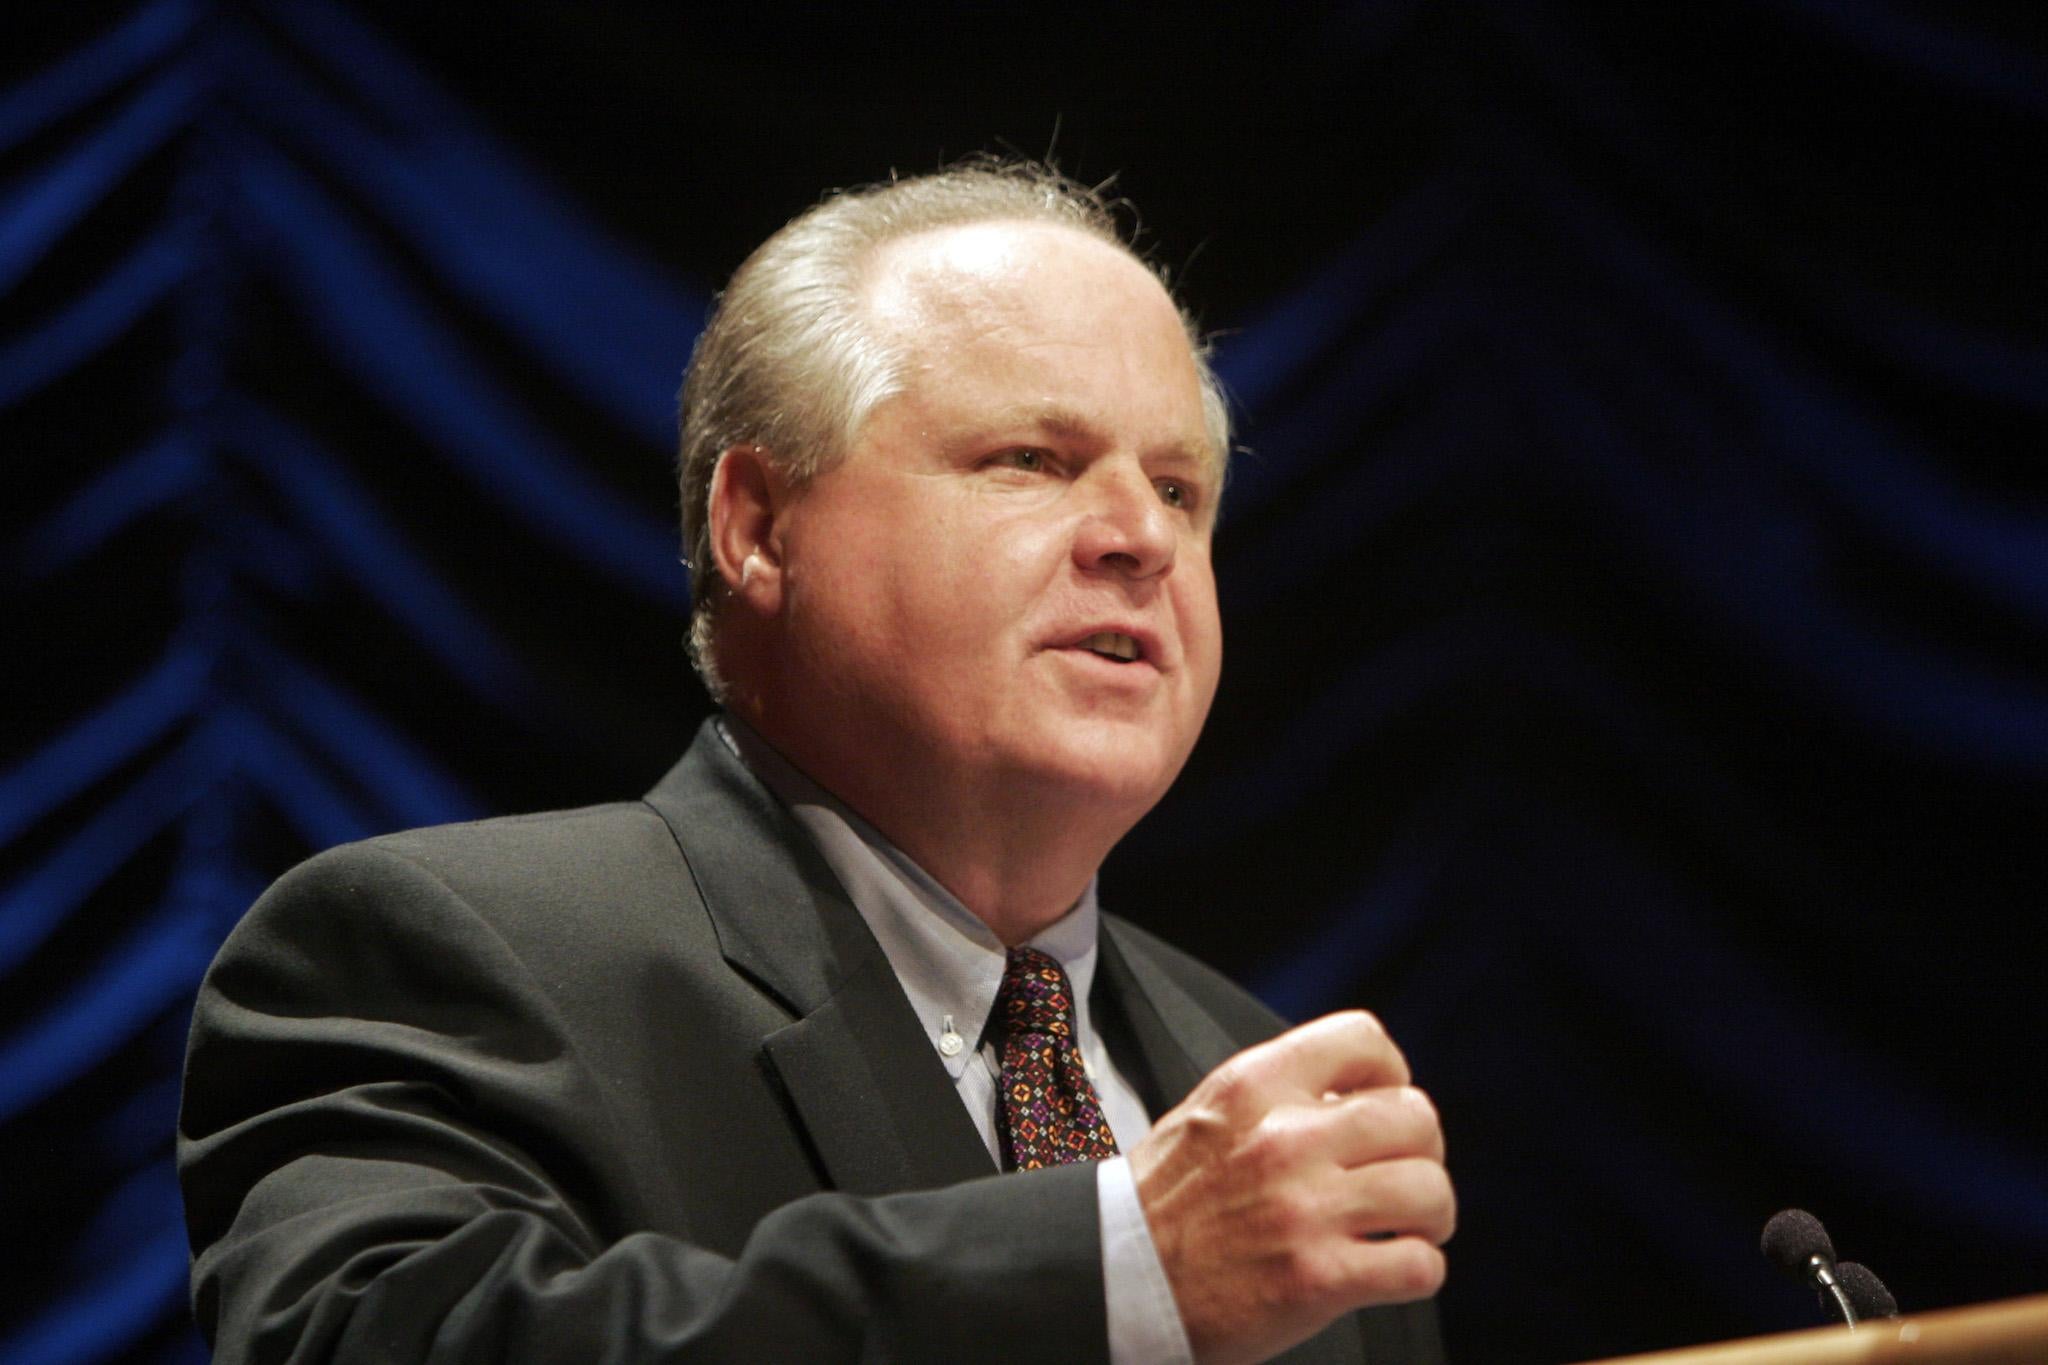 Radio show host Rush Limbaugh speaks at a forum hosted by the Heritage Foundation